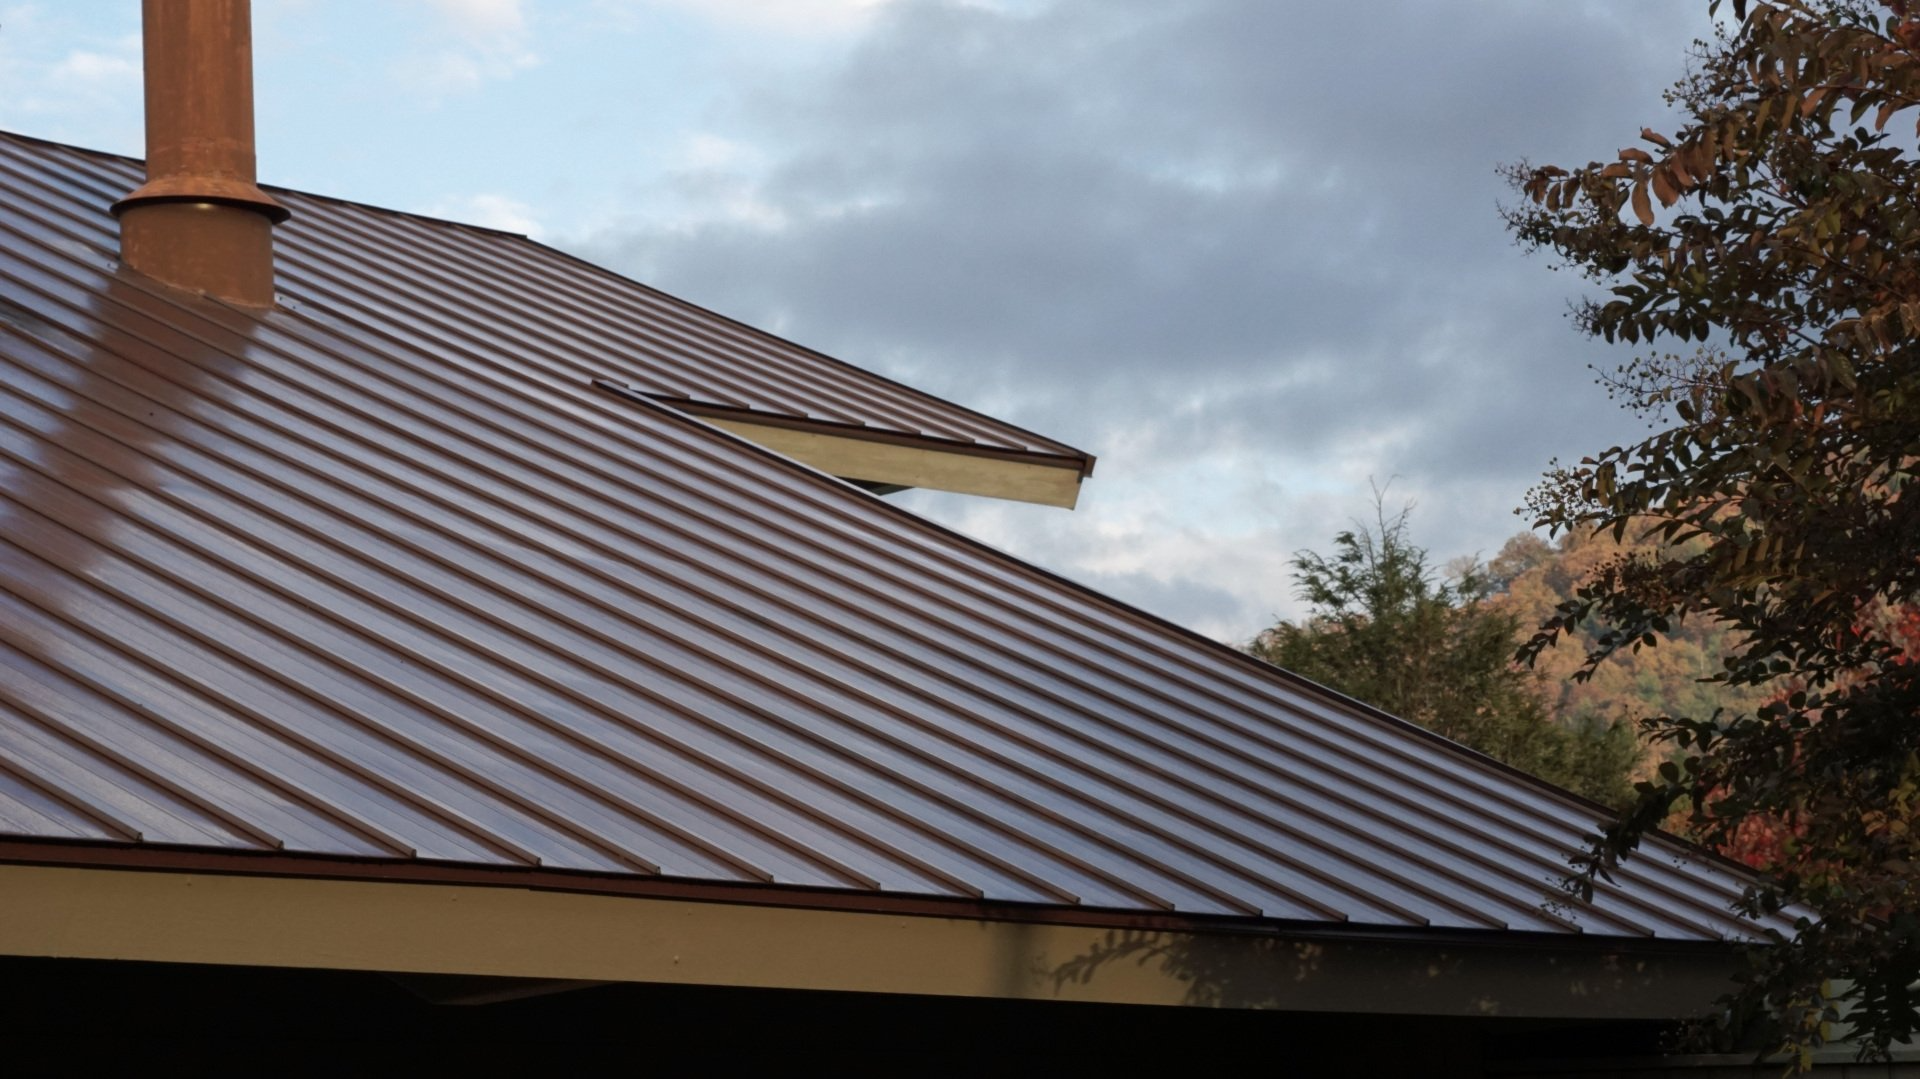 Understanding the Basics: Metal Roofs and Shingled Roofs